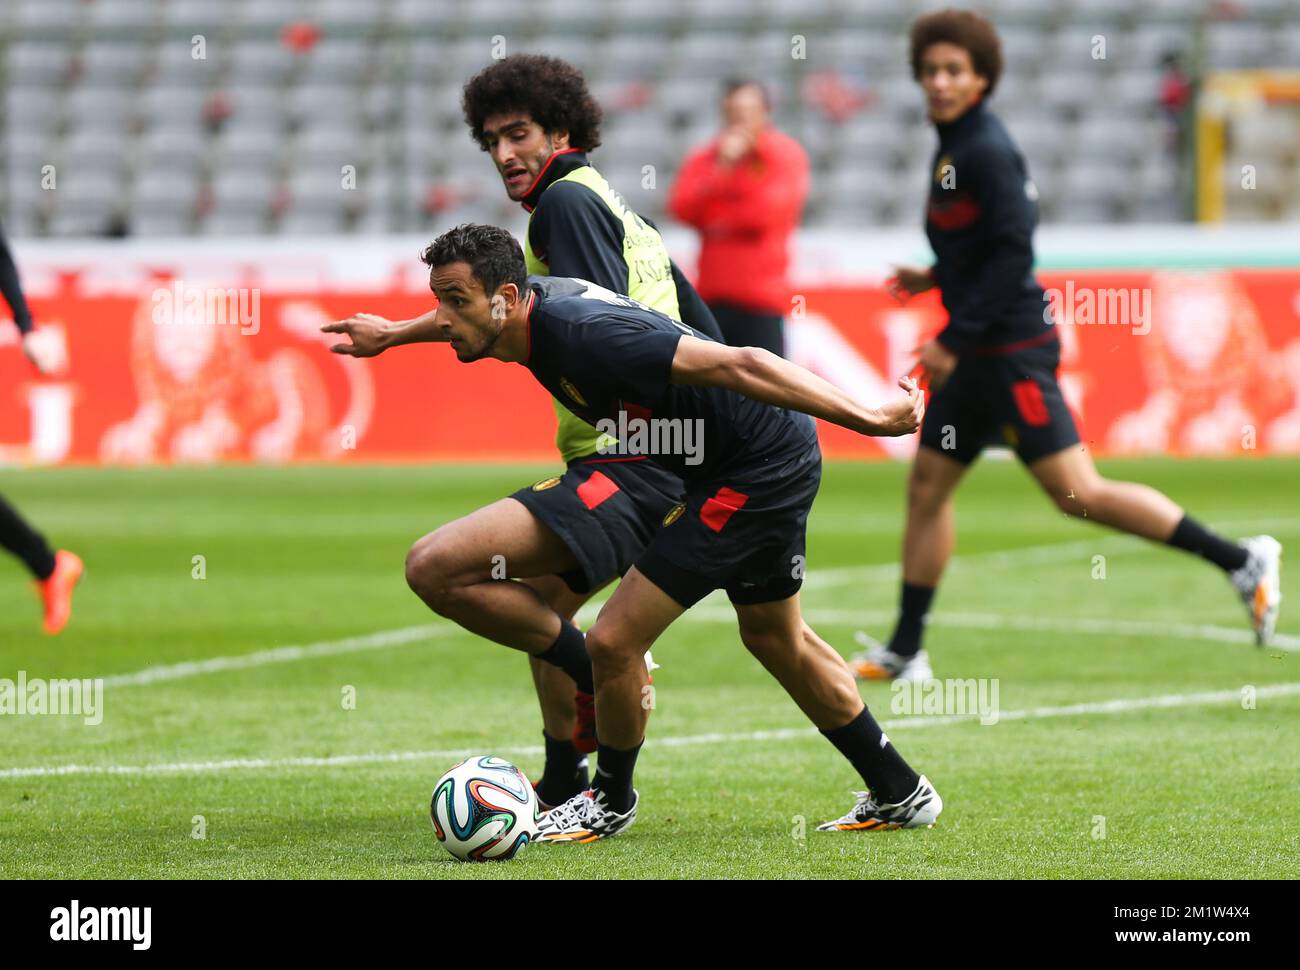 Belgium's Marouane Fellaini and Belgium's Nacer Chadli fight for the ball during the last training session of the Belgian national soccer team Red Devils before their departure to the World Cup in Brazil, on Sunday 08 June 2014, in Brussels. The 2014 Fifa World Cup takes place from 12 June till 13 July in Brazil. BELGA PHOTO VIRGINIE LEFOUR Stock Photo